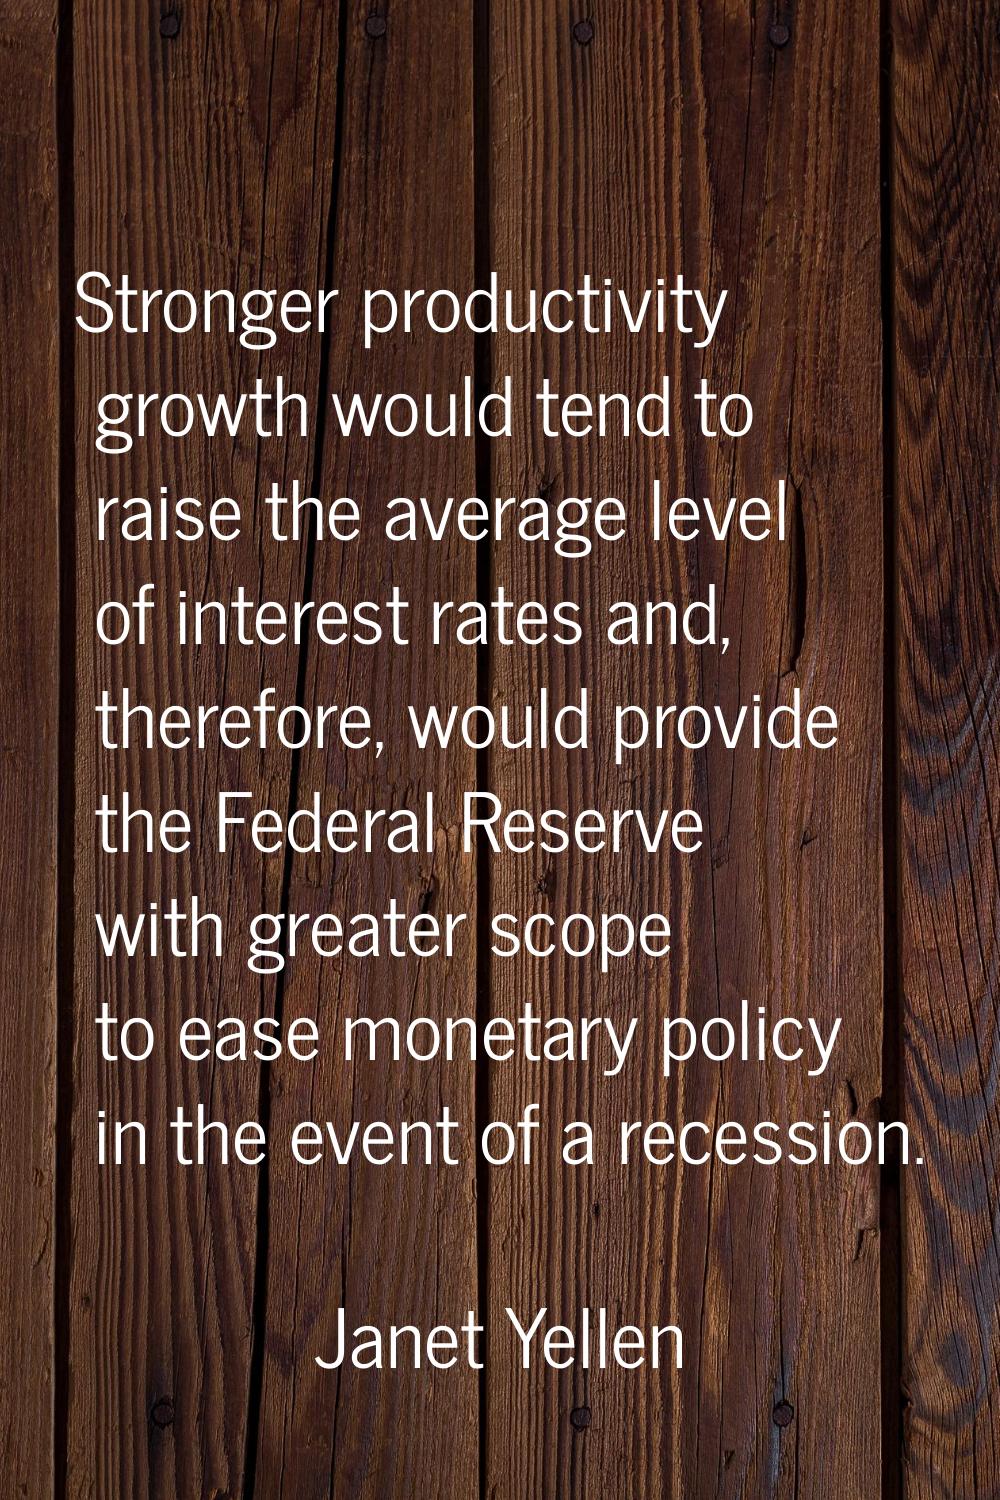 Stronger productivity growth would tend to raise the average level of interest rates and, therefore